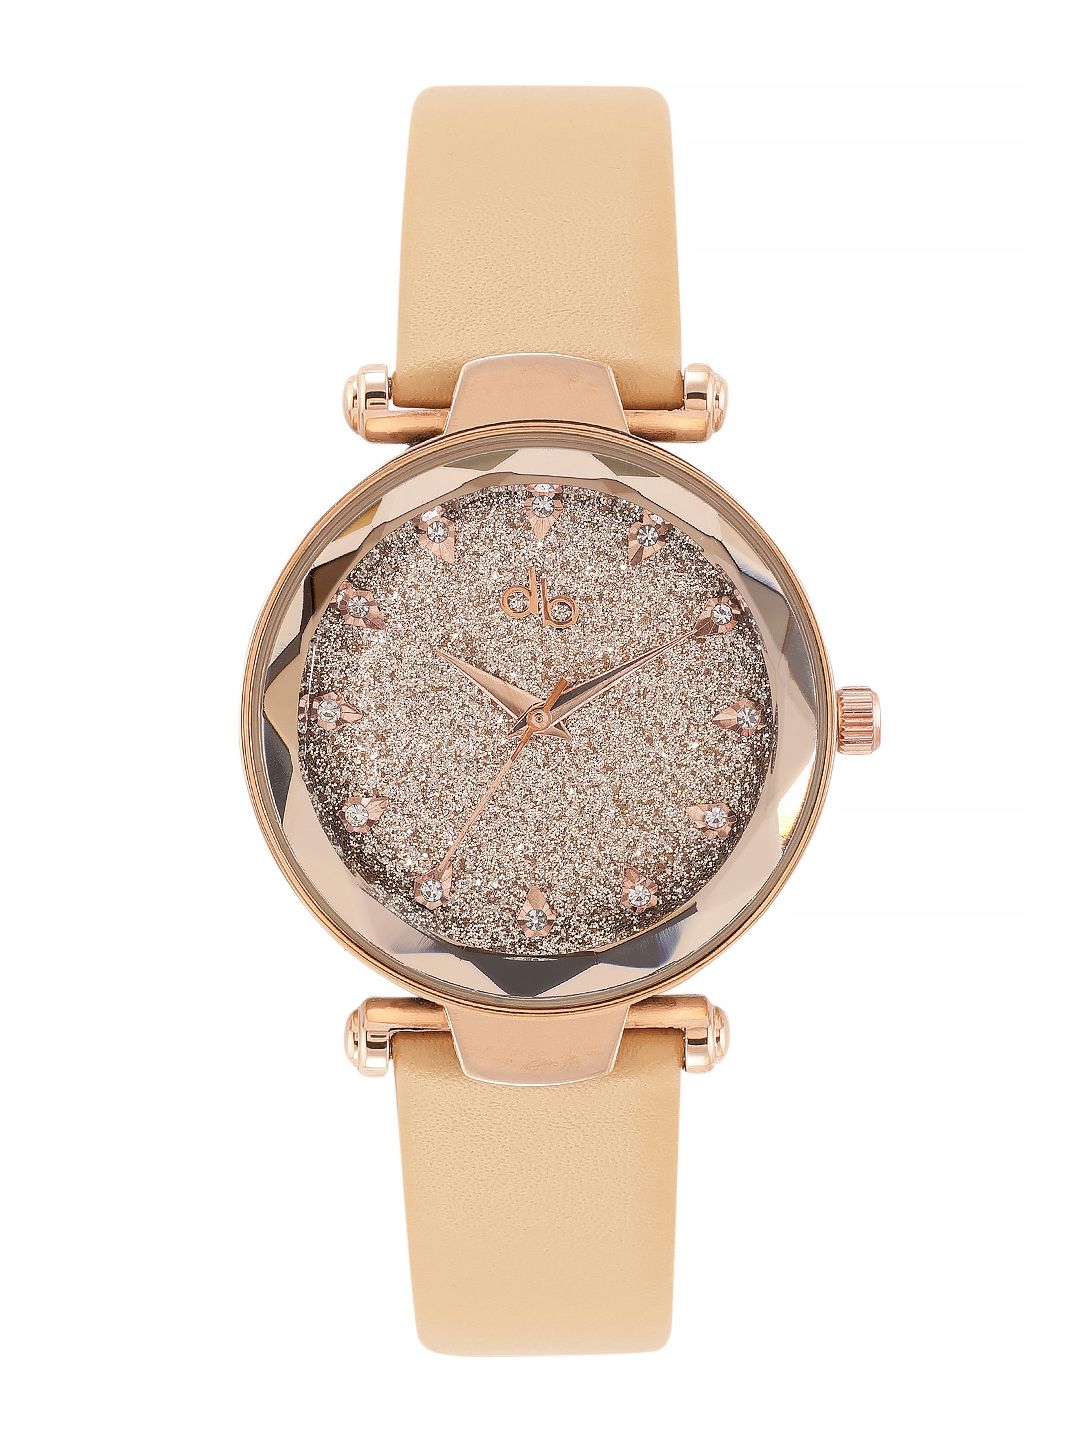 DressBerry Women Silver-Toned Leather Analogue Watch MFB-PN-WTH-6183L-1-Beige-2211584 Price in India